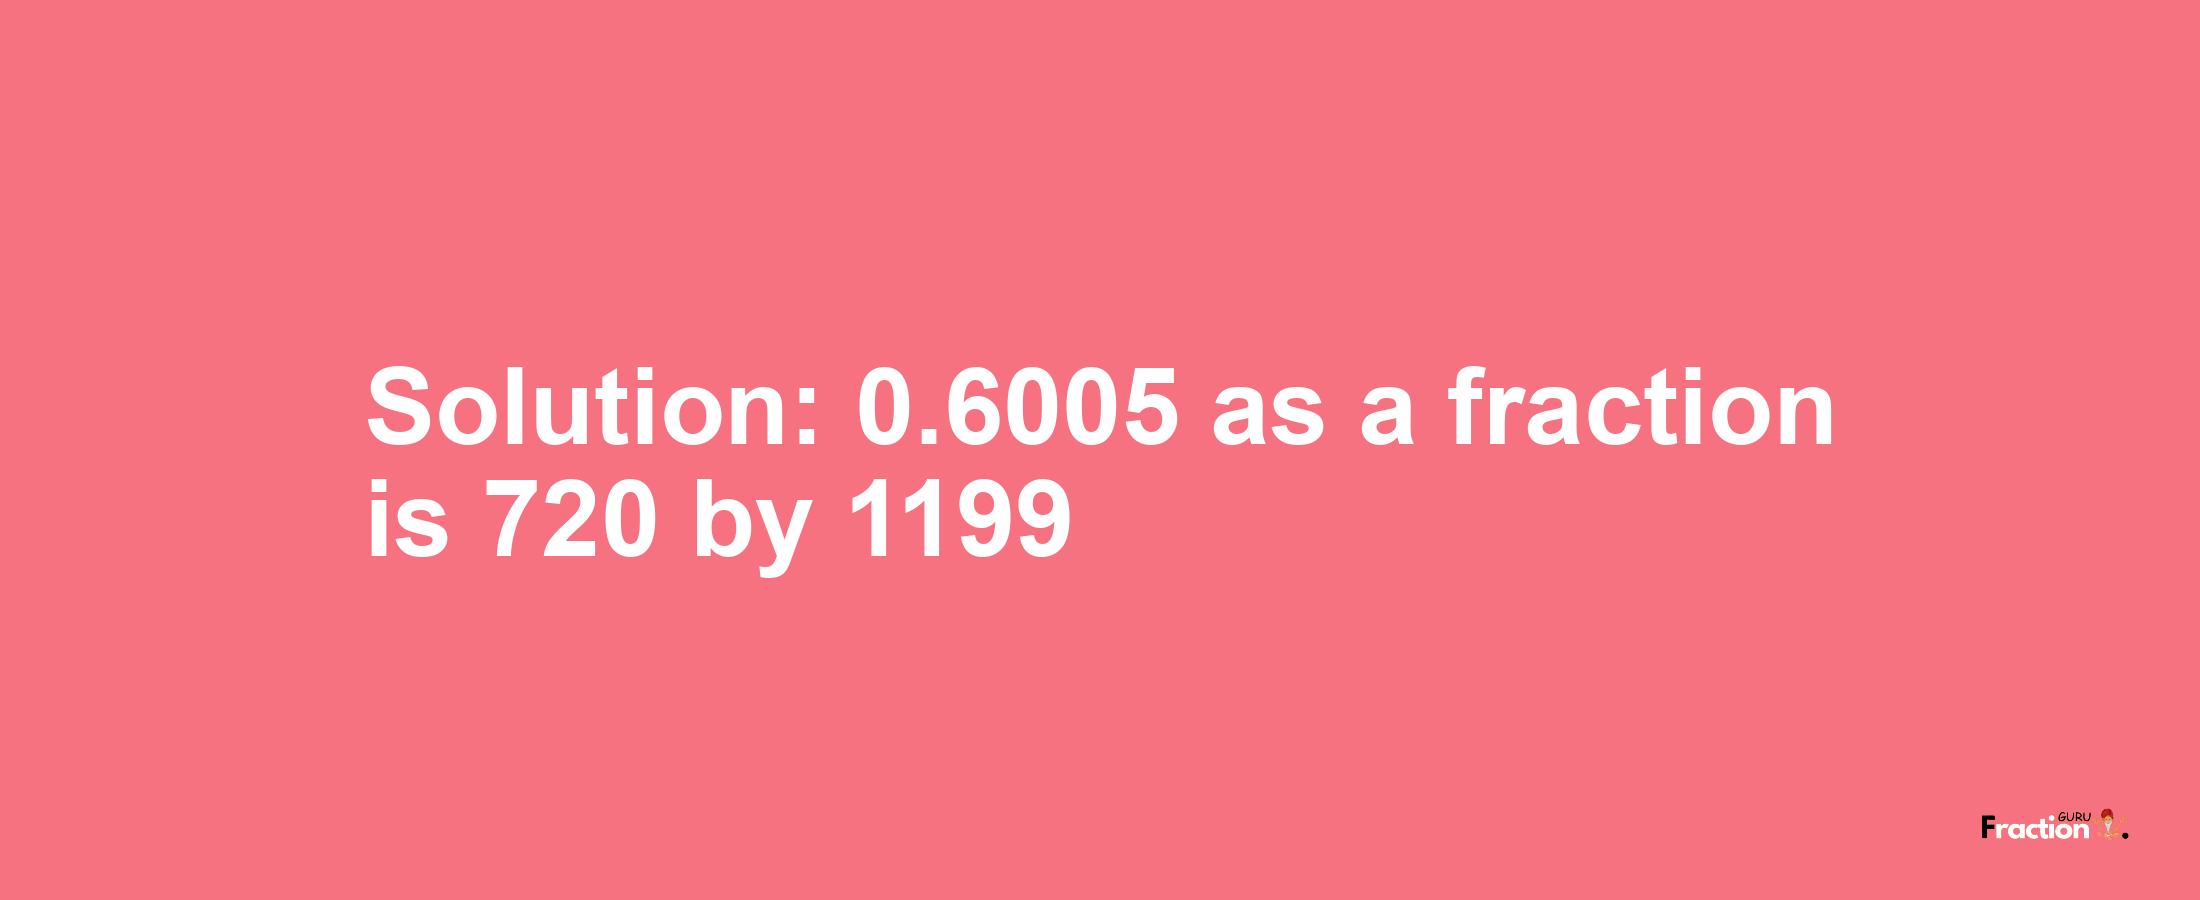 Solution:0.6005 as a fraction is 720/1199